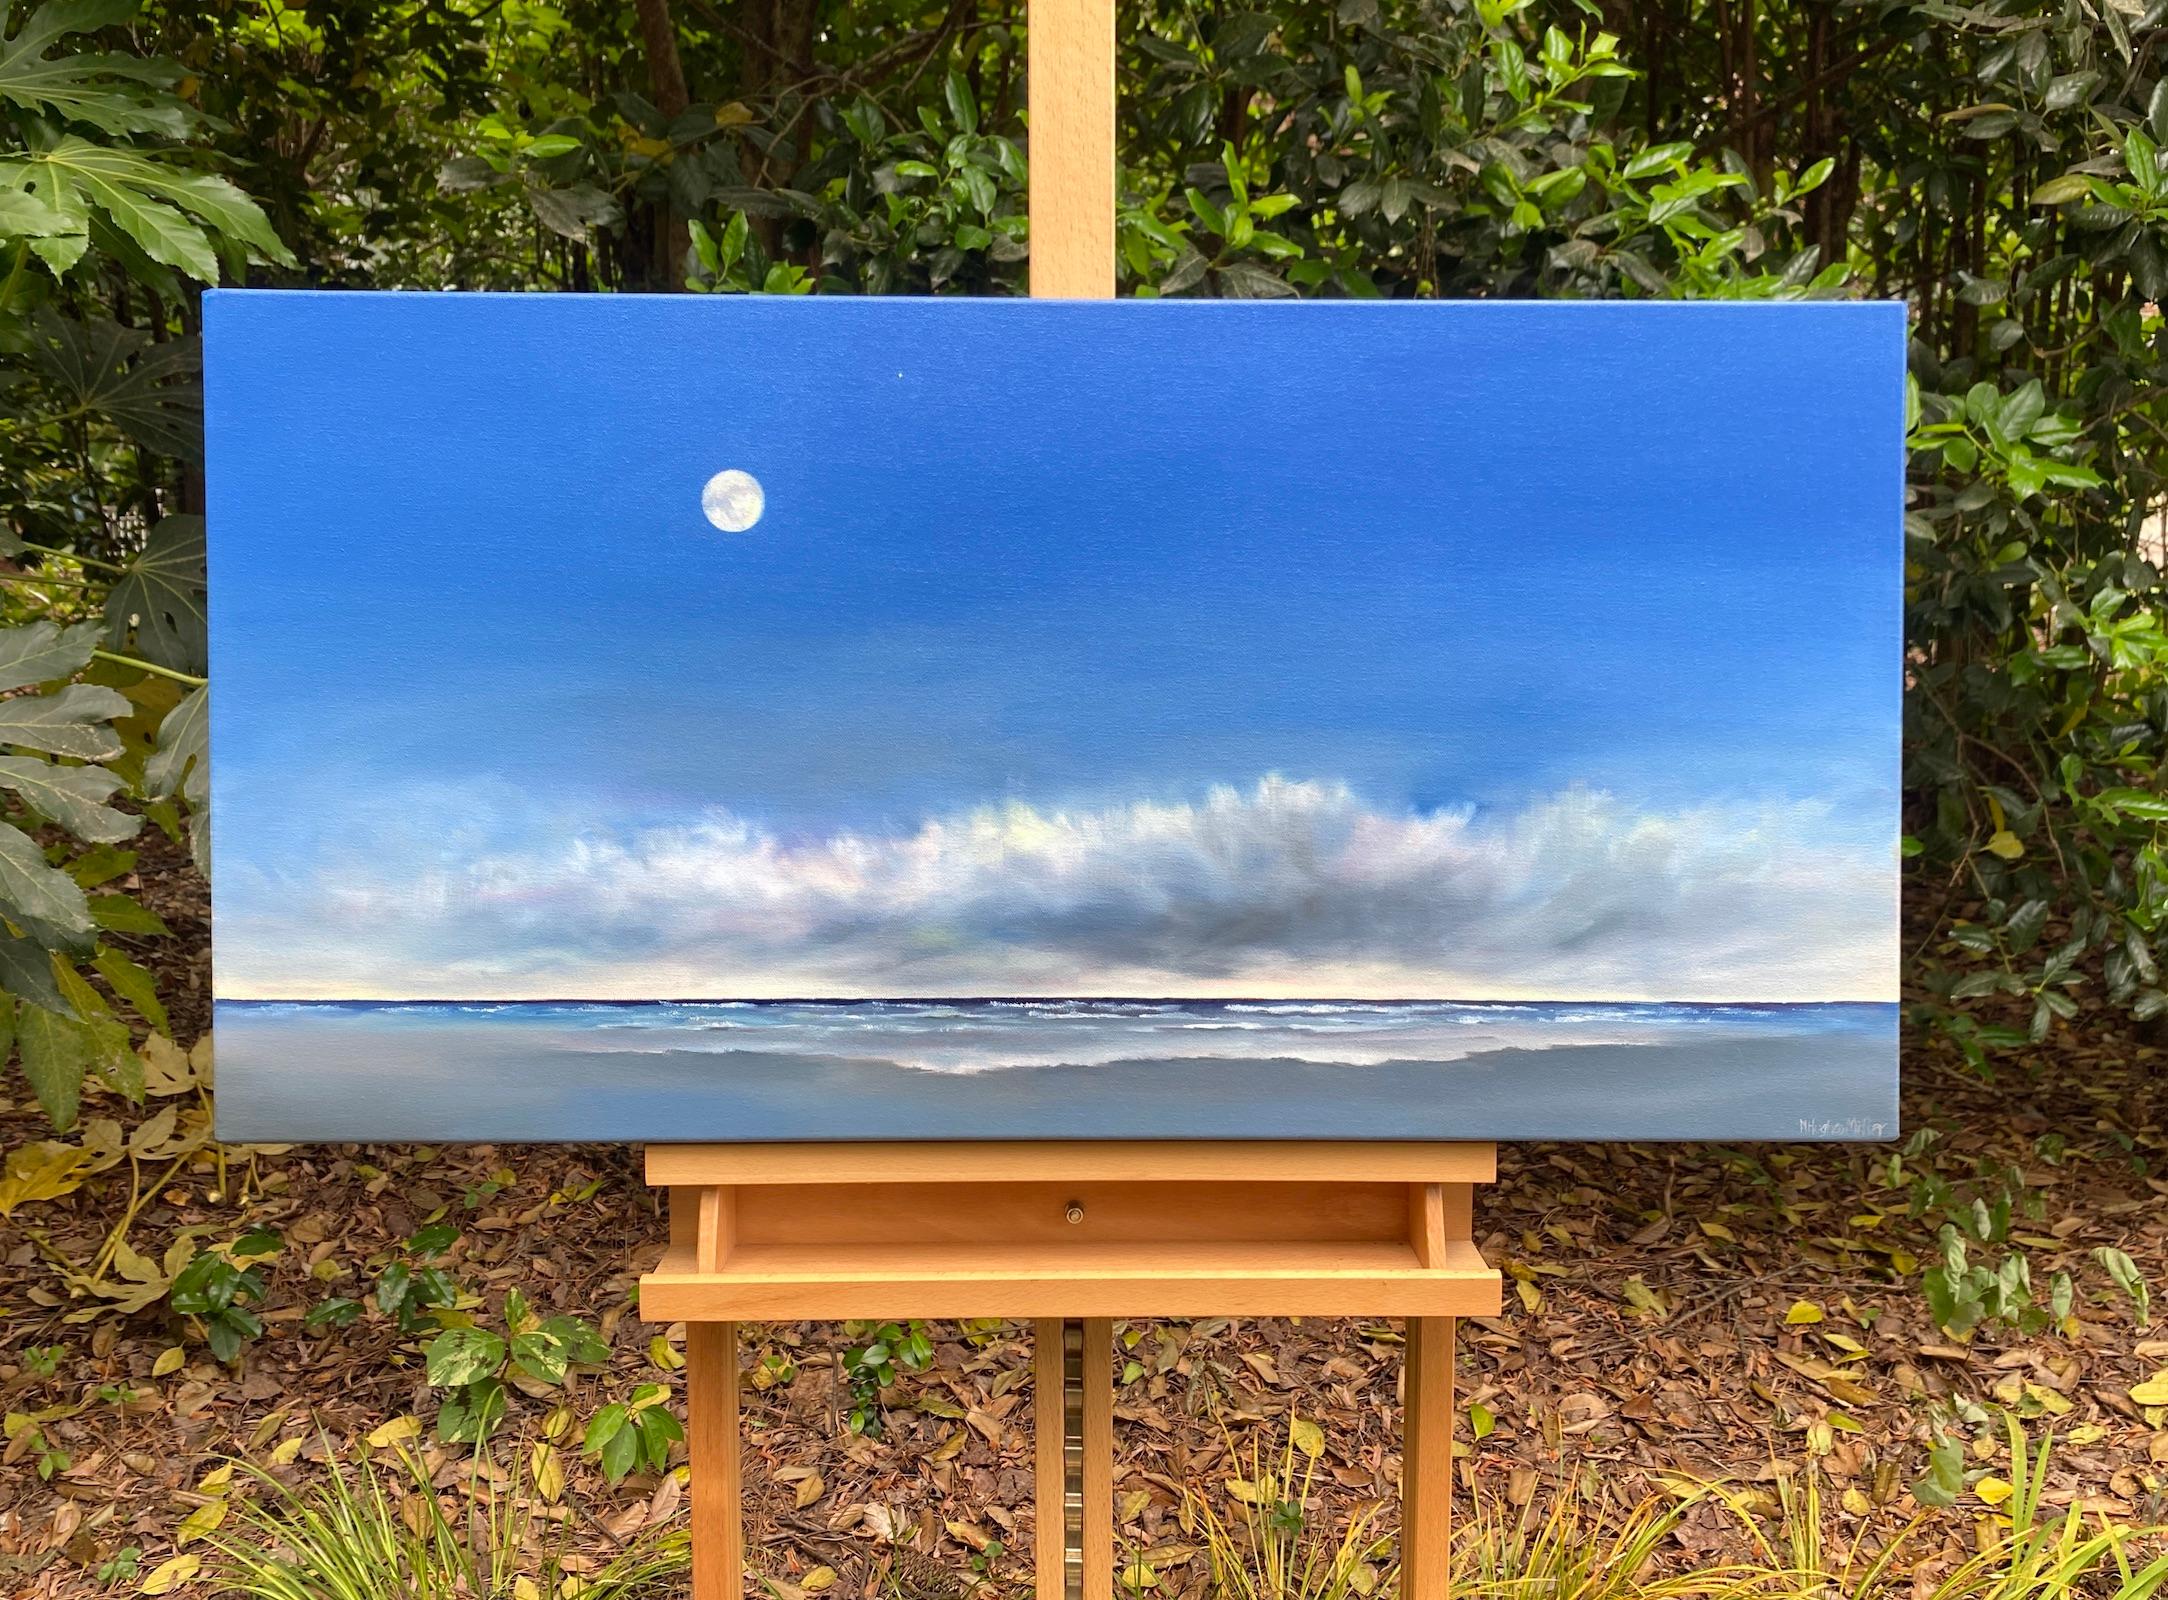 <p>Artist Comments<br>Beneath the moonlit sky and wispy clouds, gentle waves crash upon the quiet shore. The vast expanse of the seascape offers a feeling of serene openness and possibilities. A profound sense of calm fills the rich blue hues across